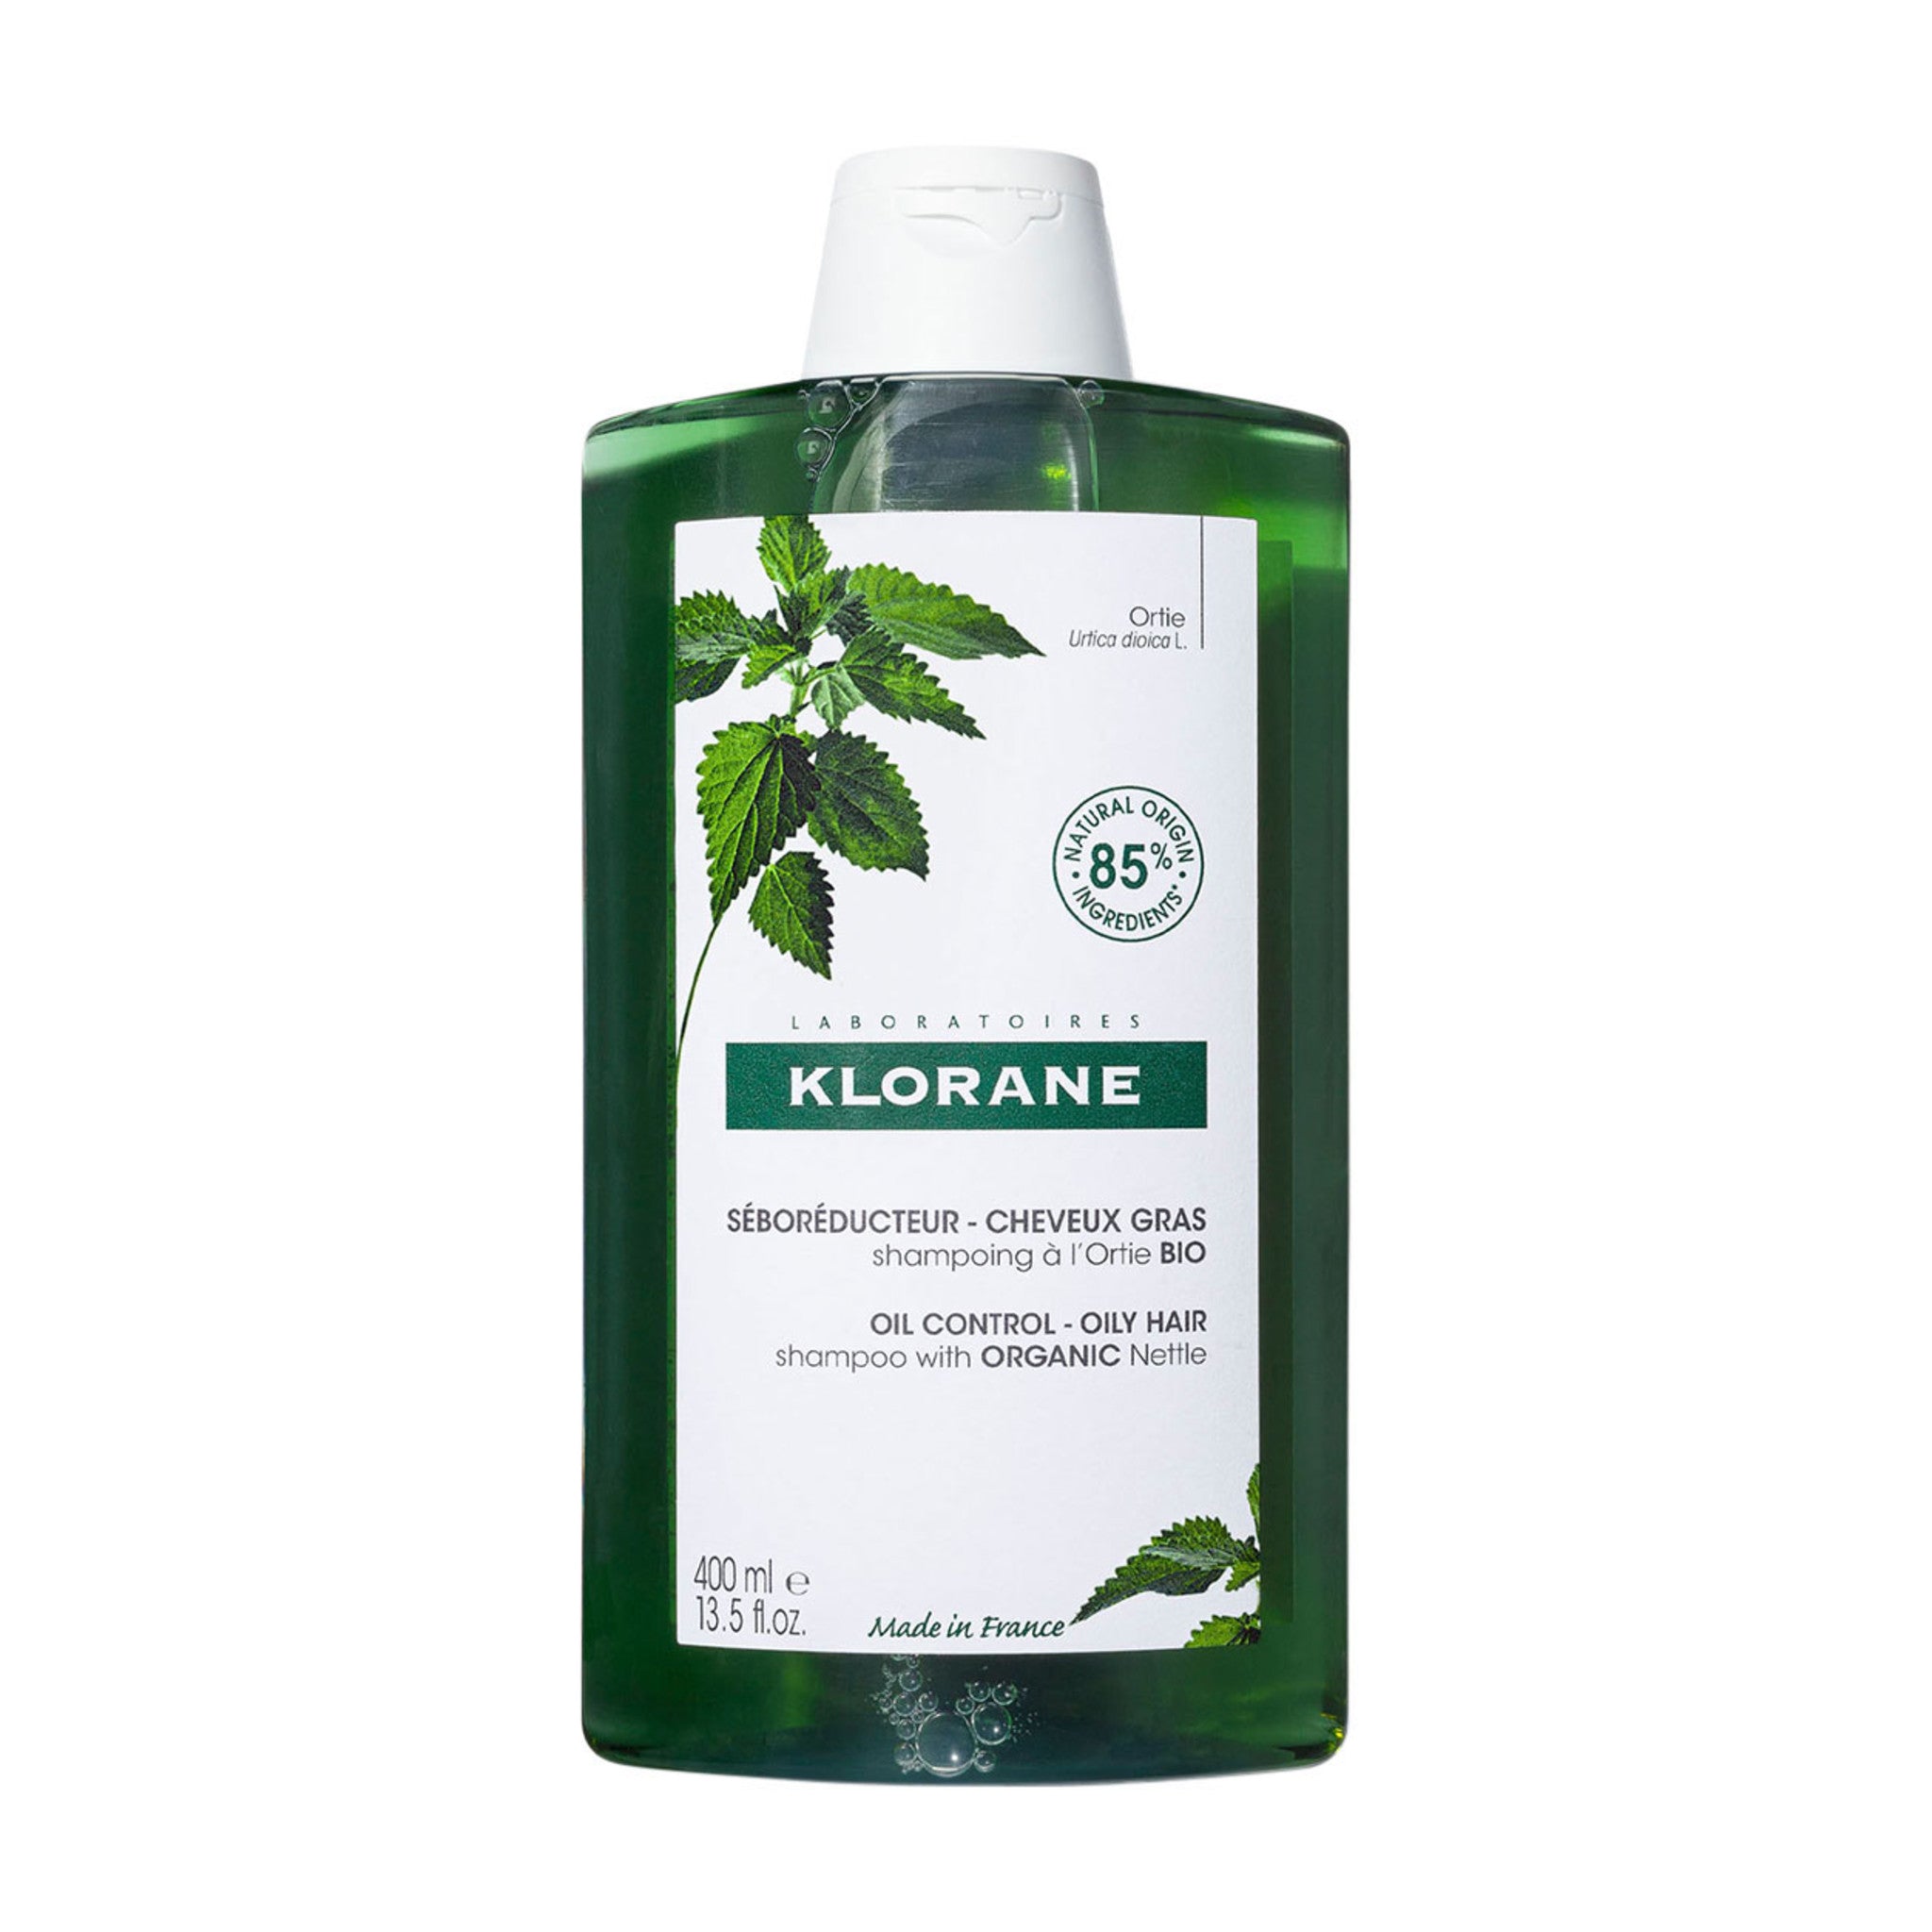 Klorane Oil Control Shampoo With Nettle main image.